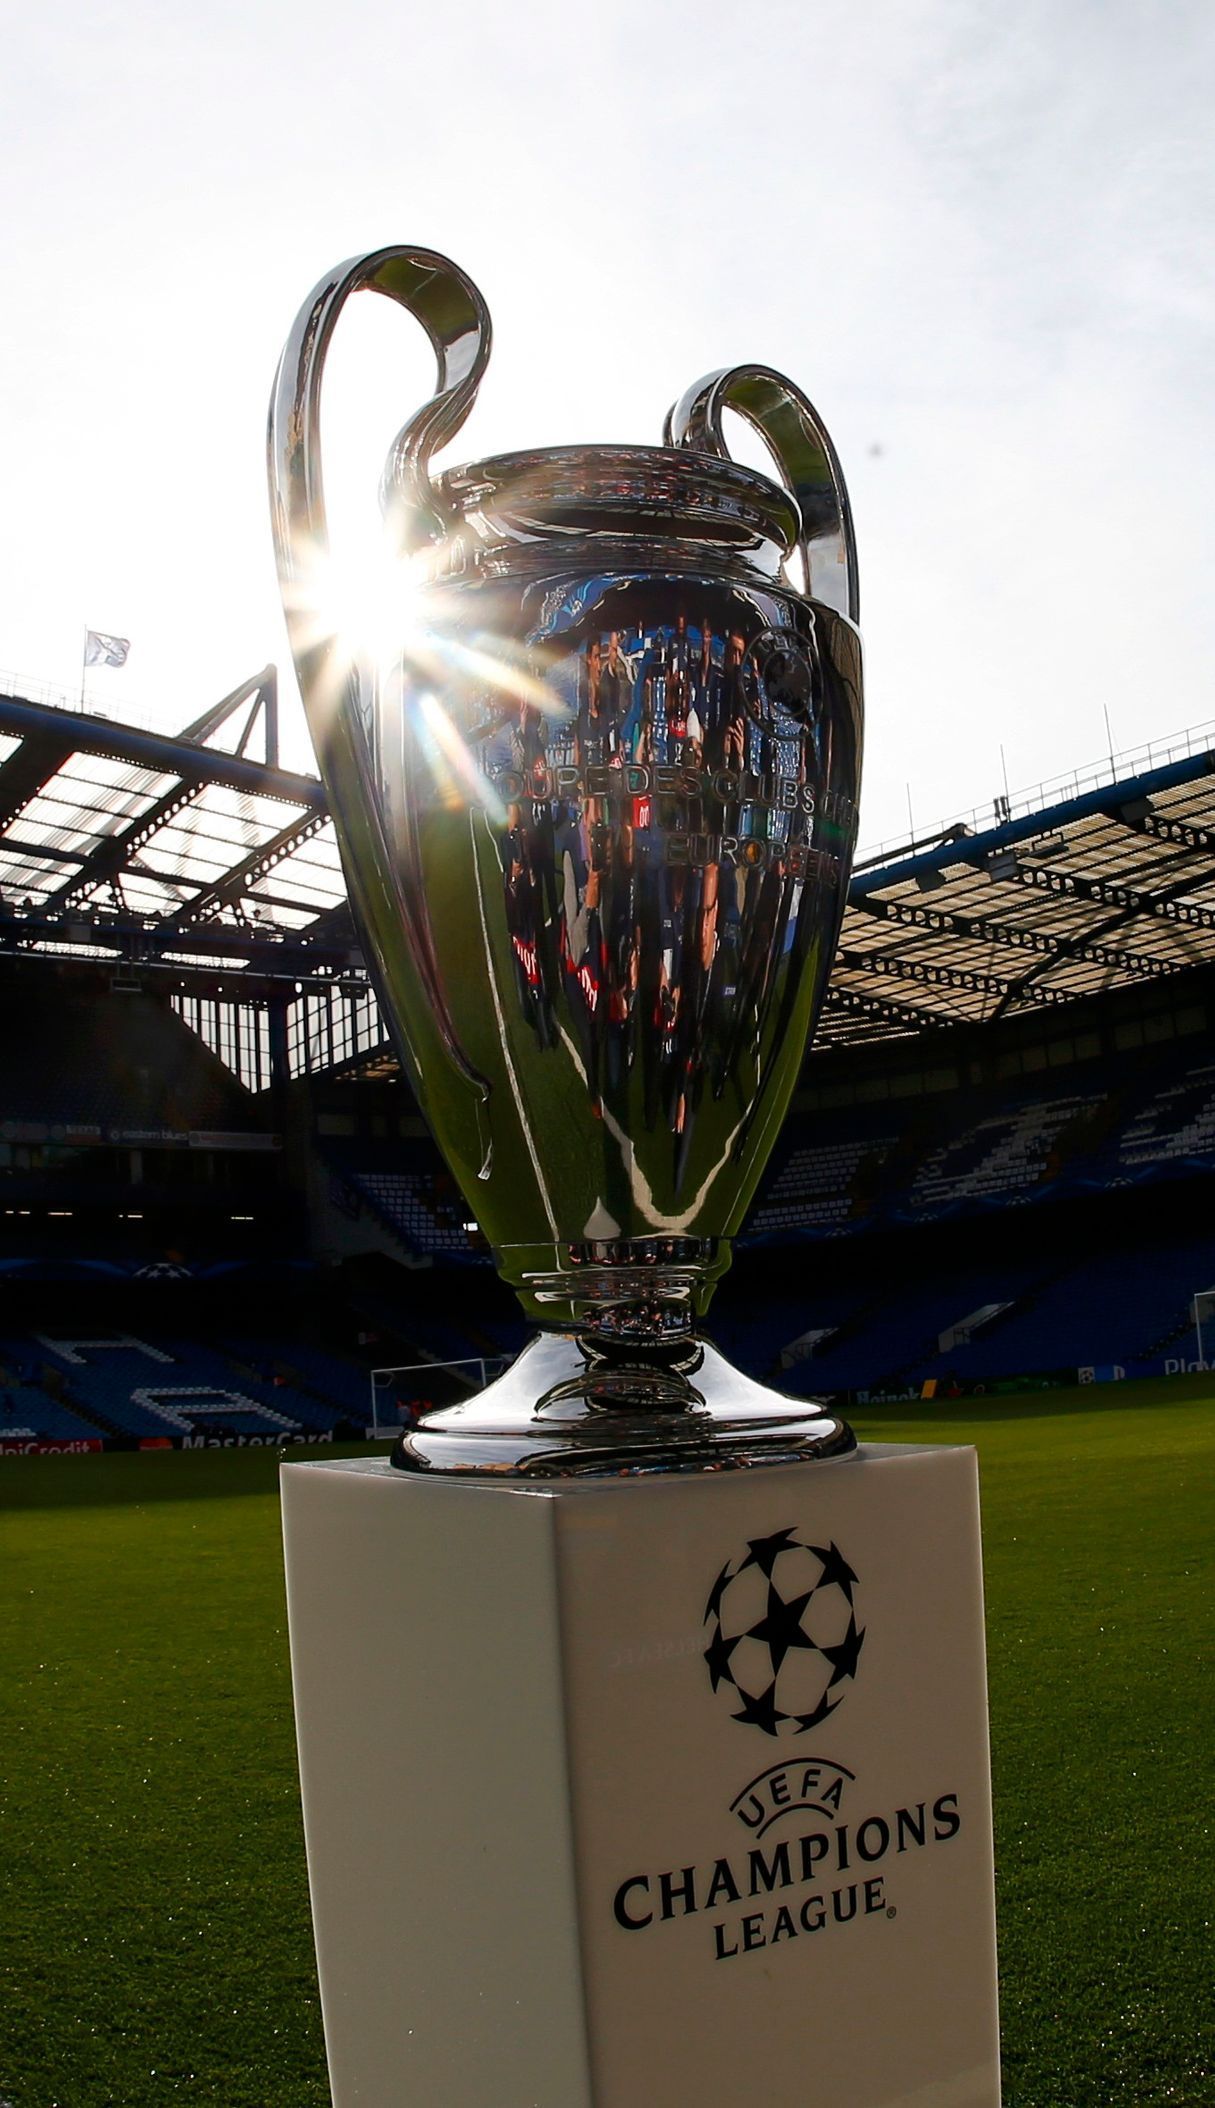 The Champions League trophy is displayed on the pitch inside Stamford Bridge before the Champions League semi-final second leg soccer match between Atletico and Chelsea in London